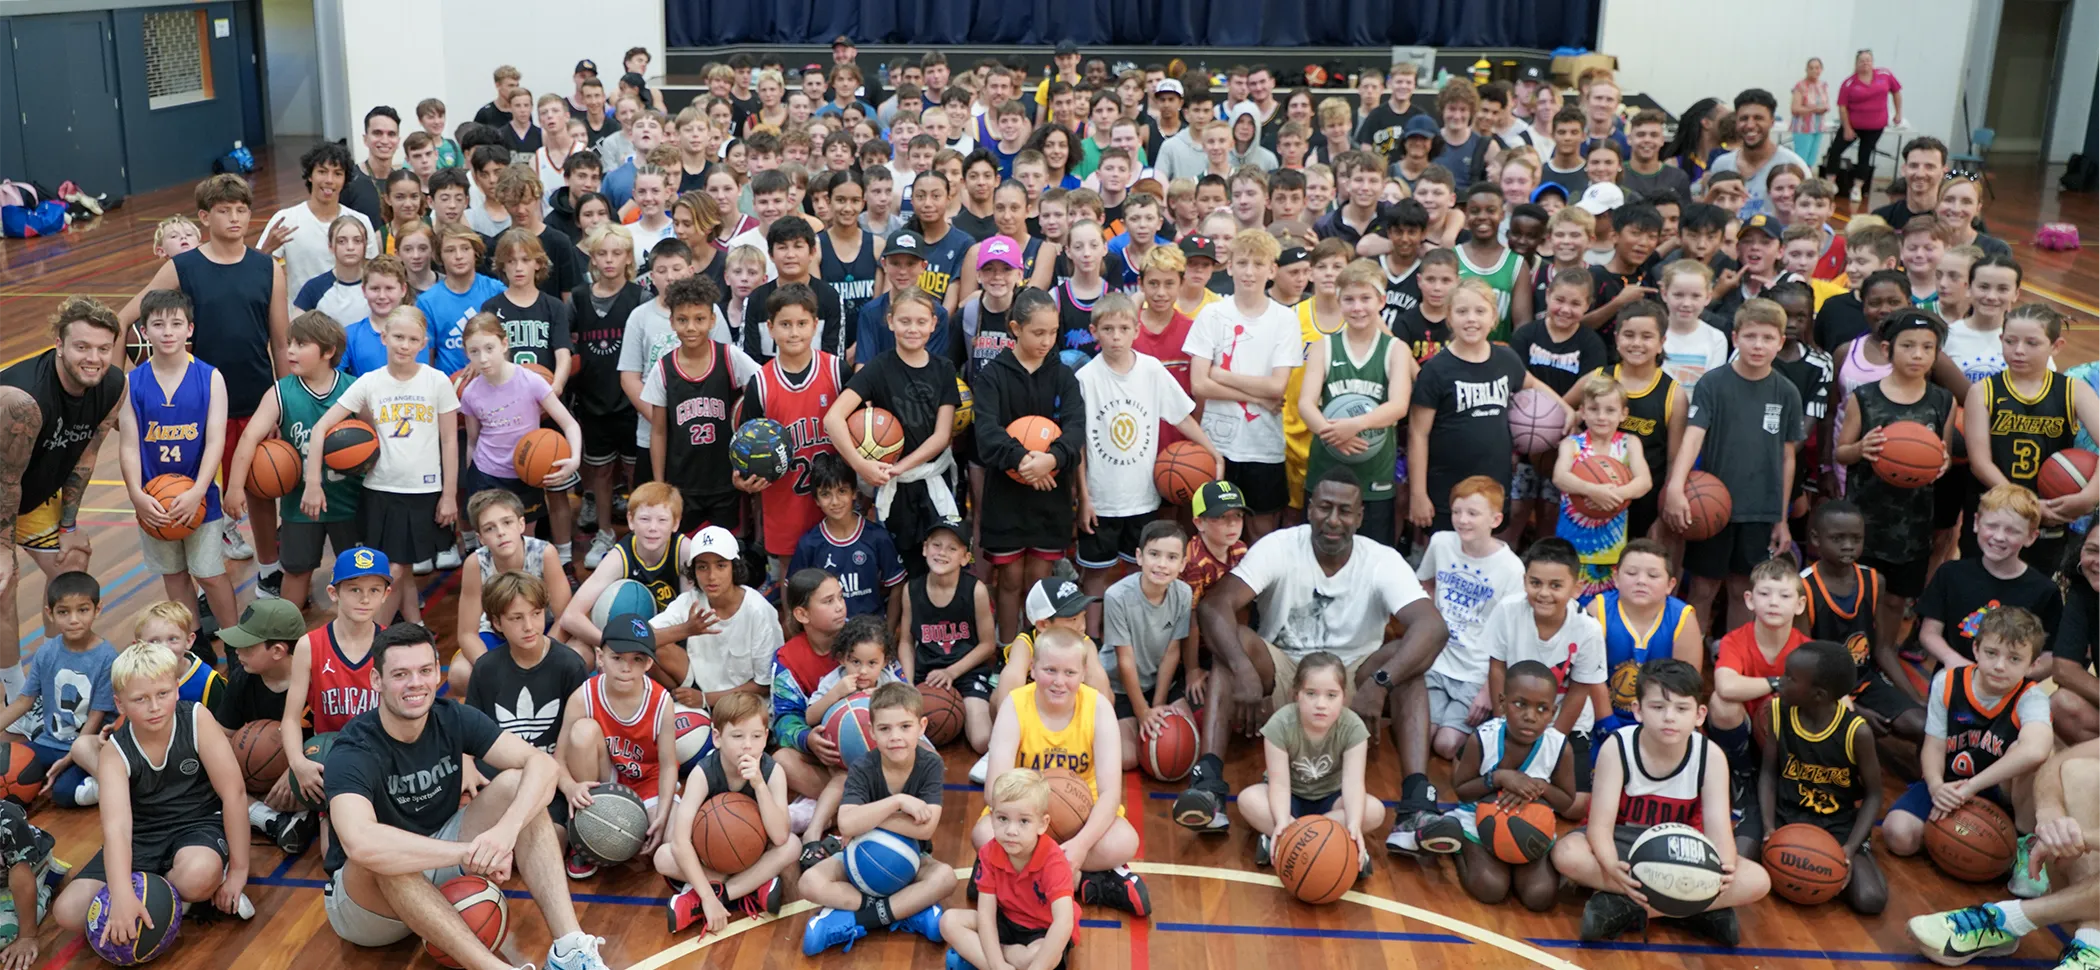 2023 Supercamp: Queensland’s Premier Basketball Camp. Great coaching with 10 full courts.